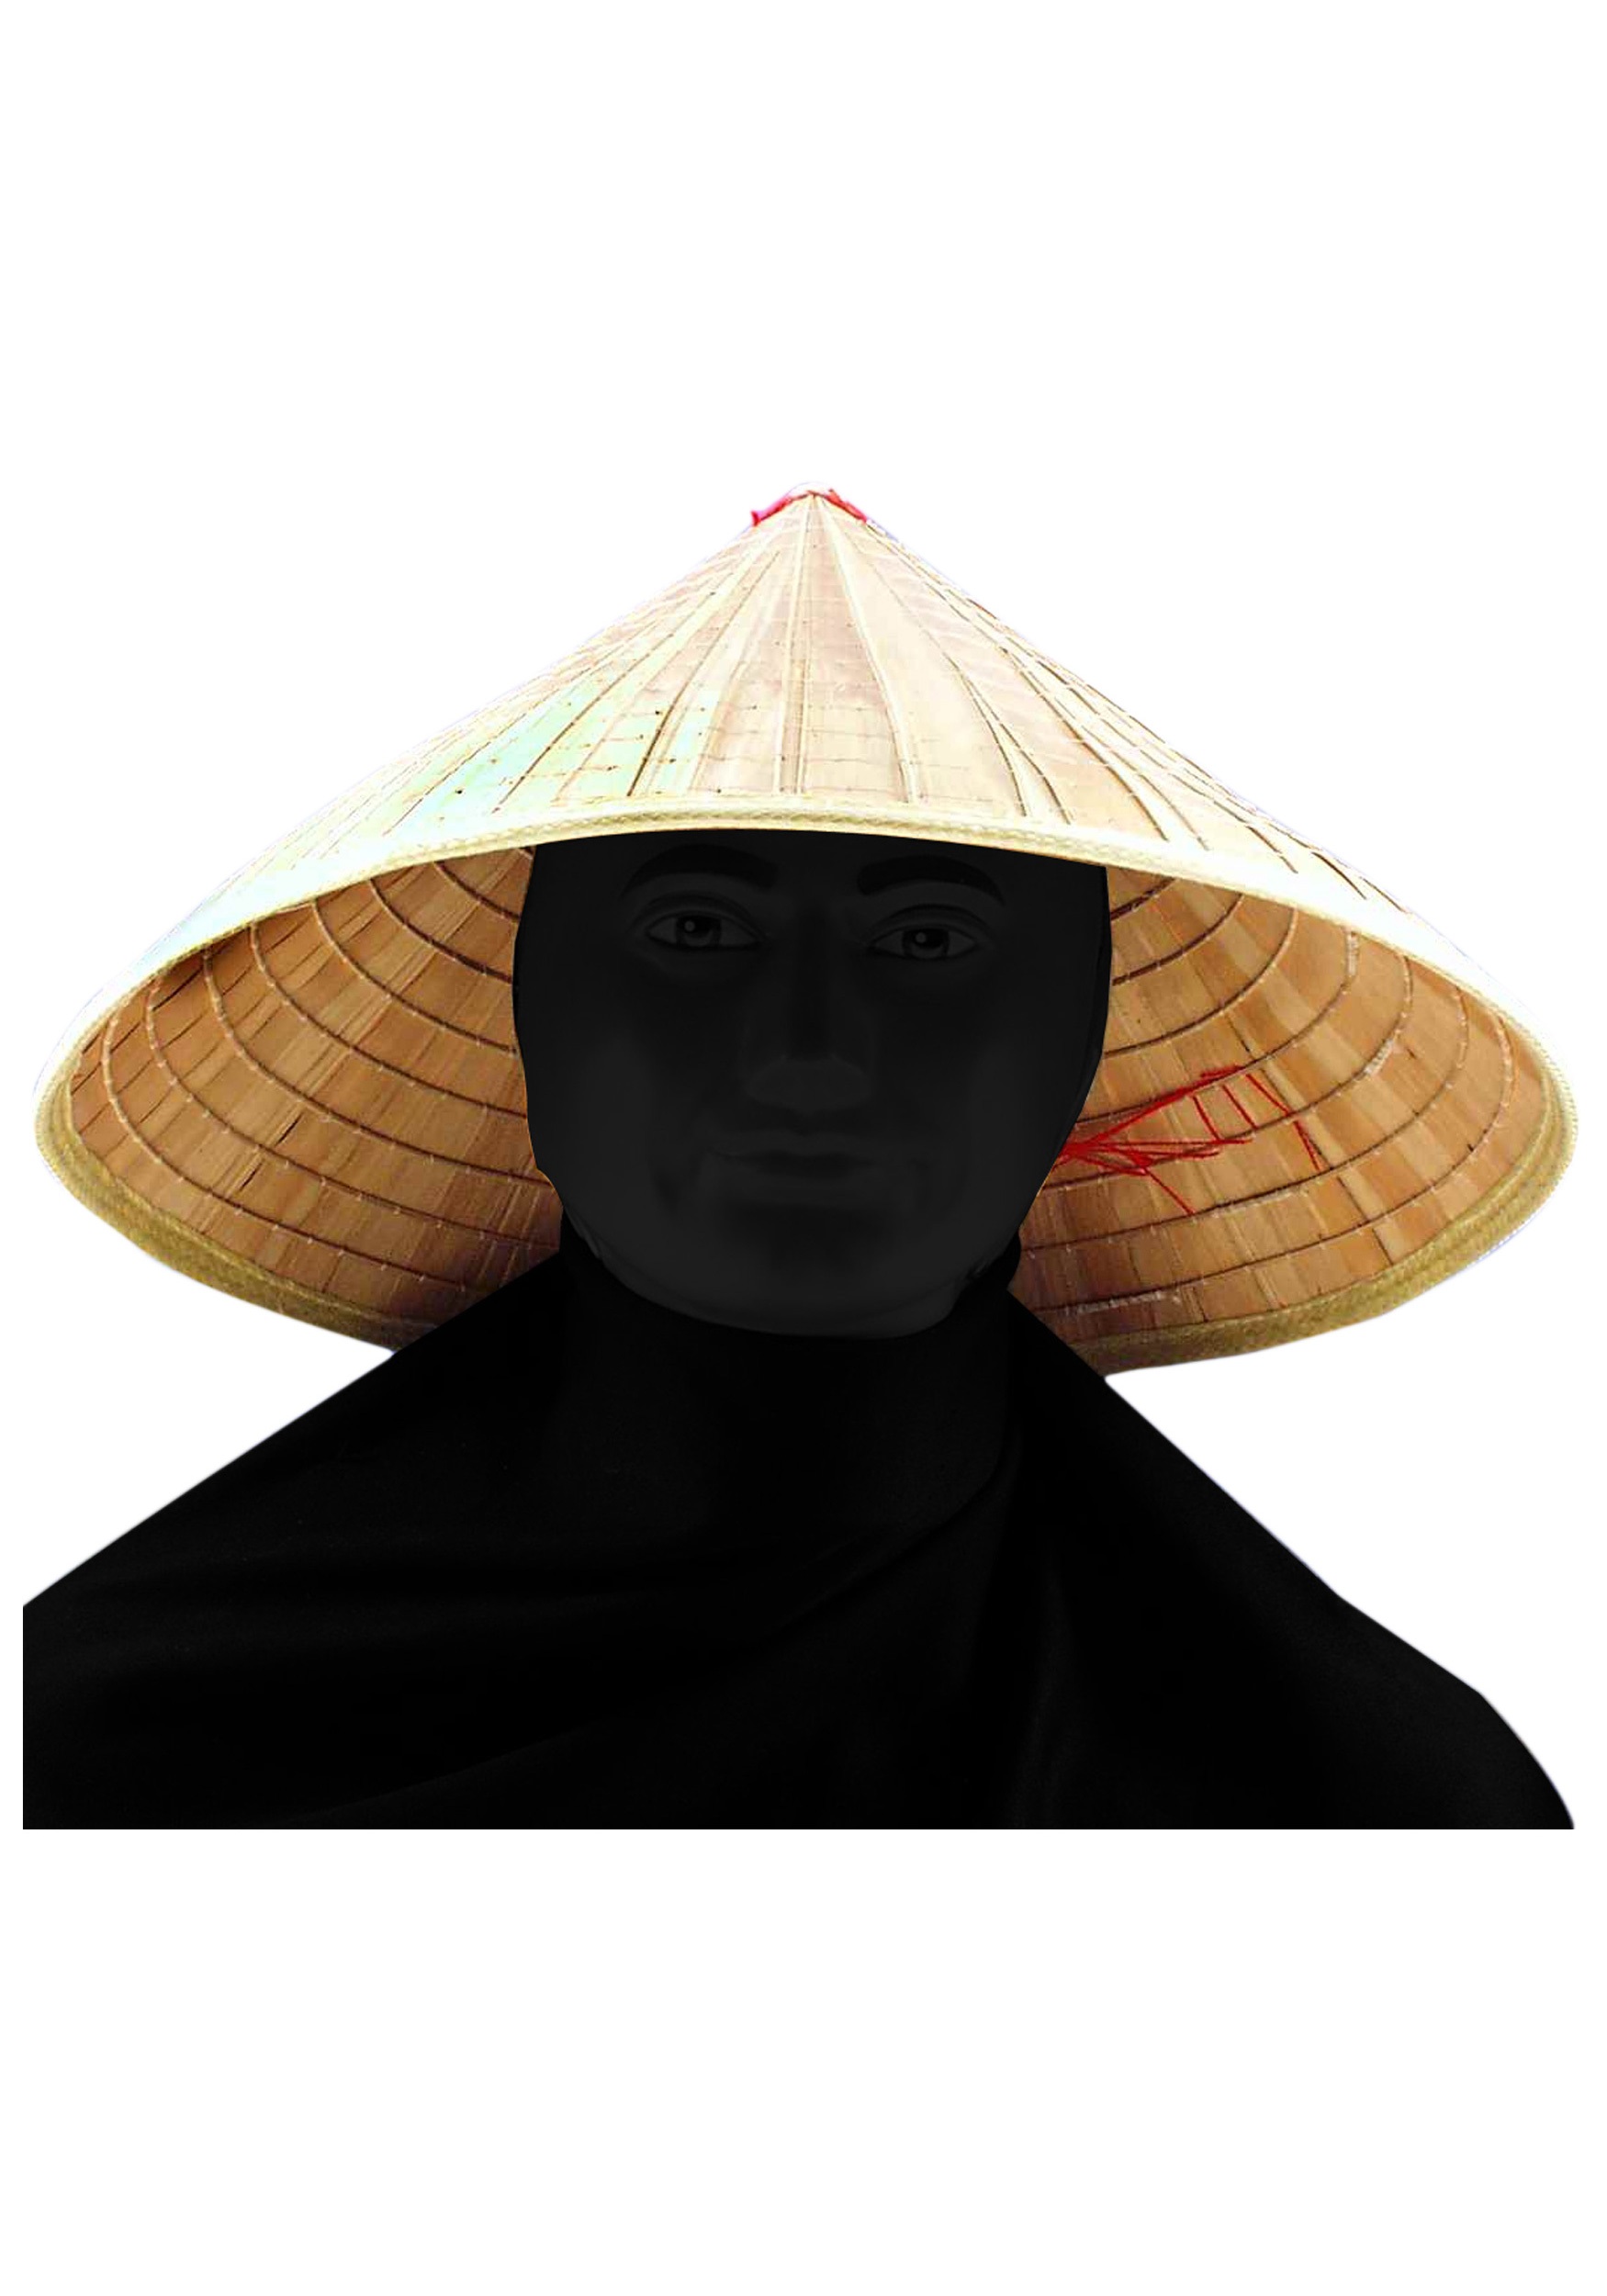 http://images.halloweencostumes.com/products/3746/1-1/chinese-bamboo-hat.jpg